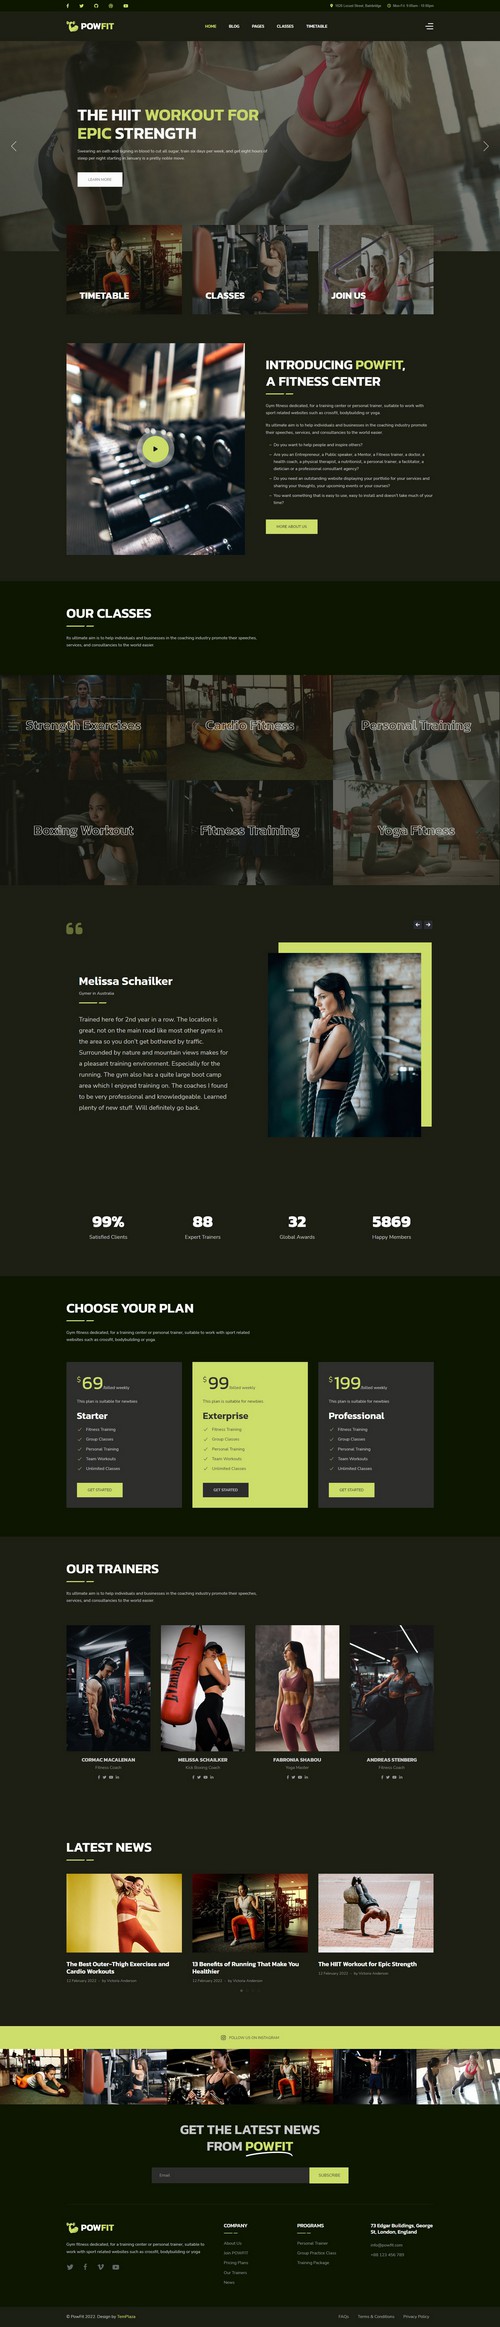 PowFit - Gym Fitness, Yoga Trainer & Sport Clubs Joomla Template